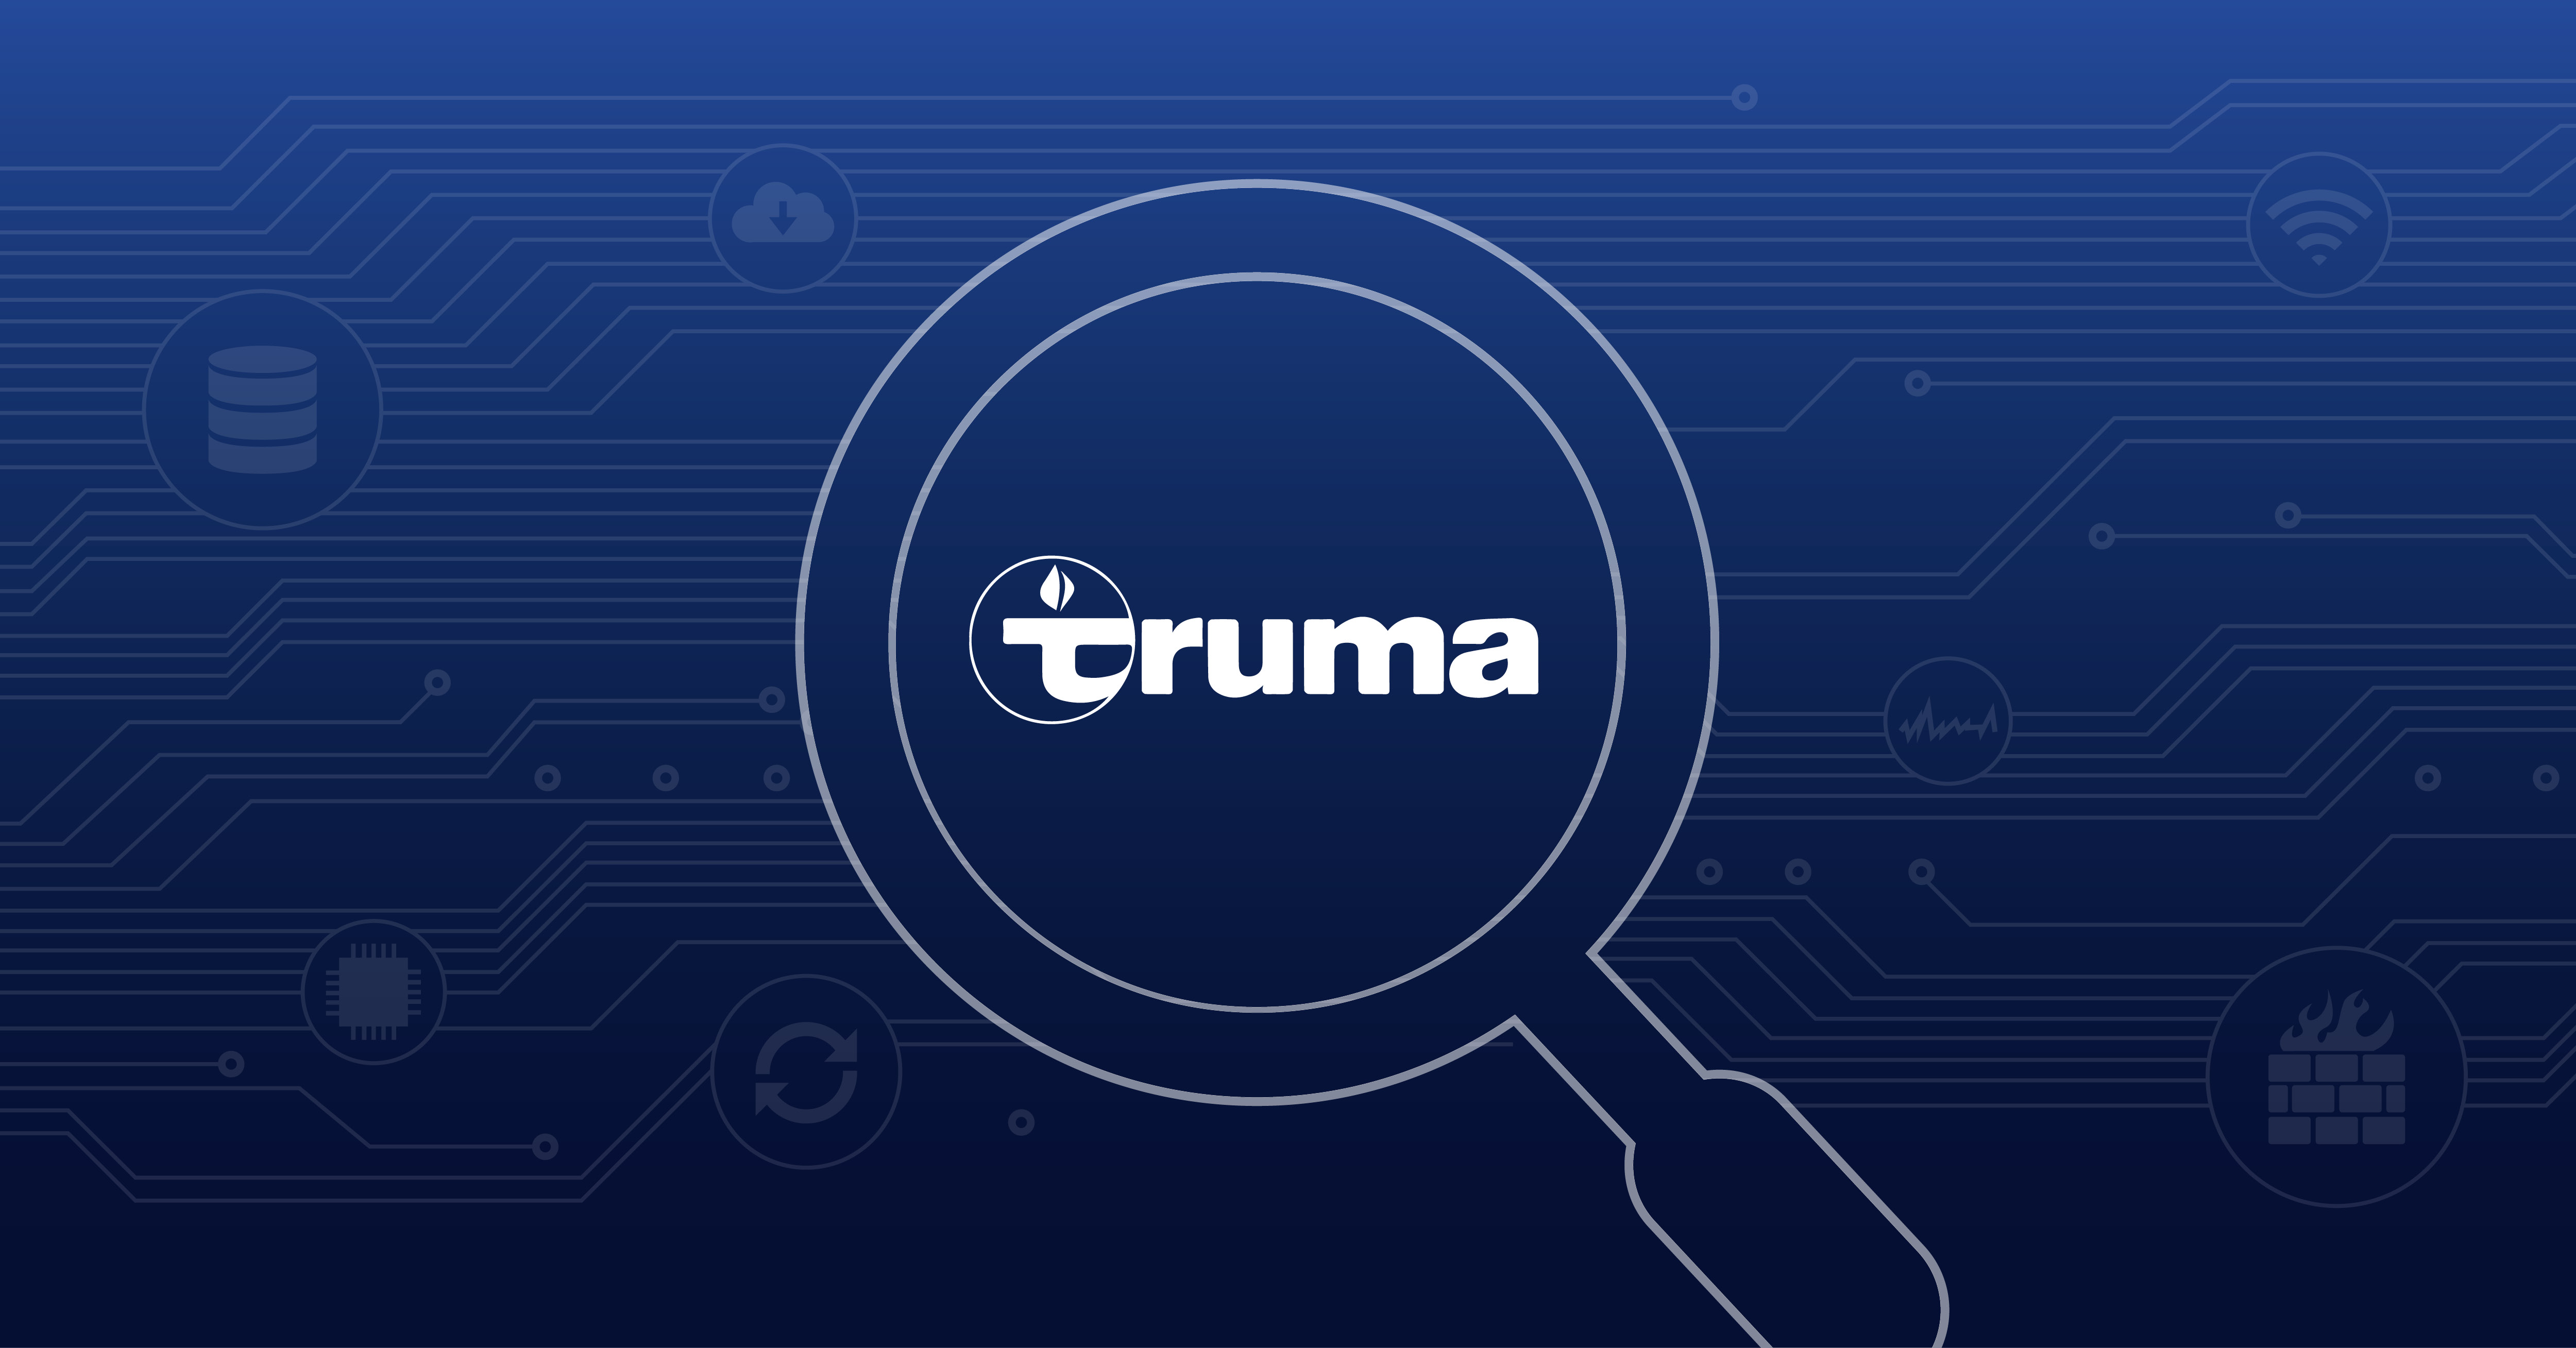 Truma secures its production, business processes, and IT with Derdack and PRTG